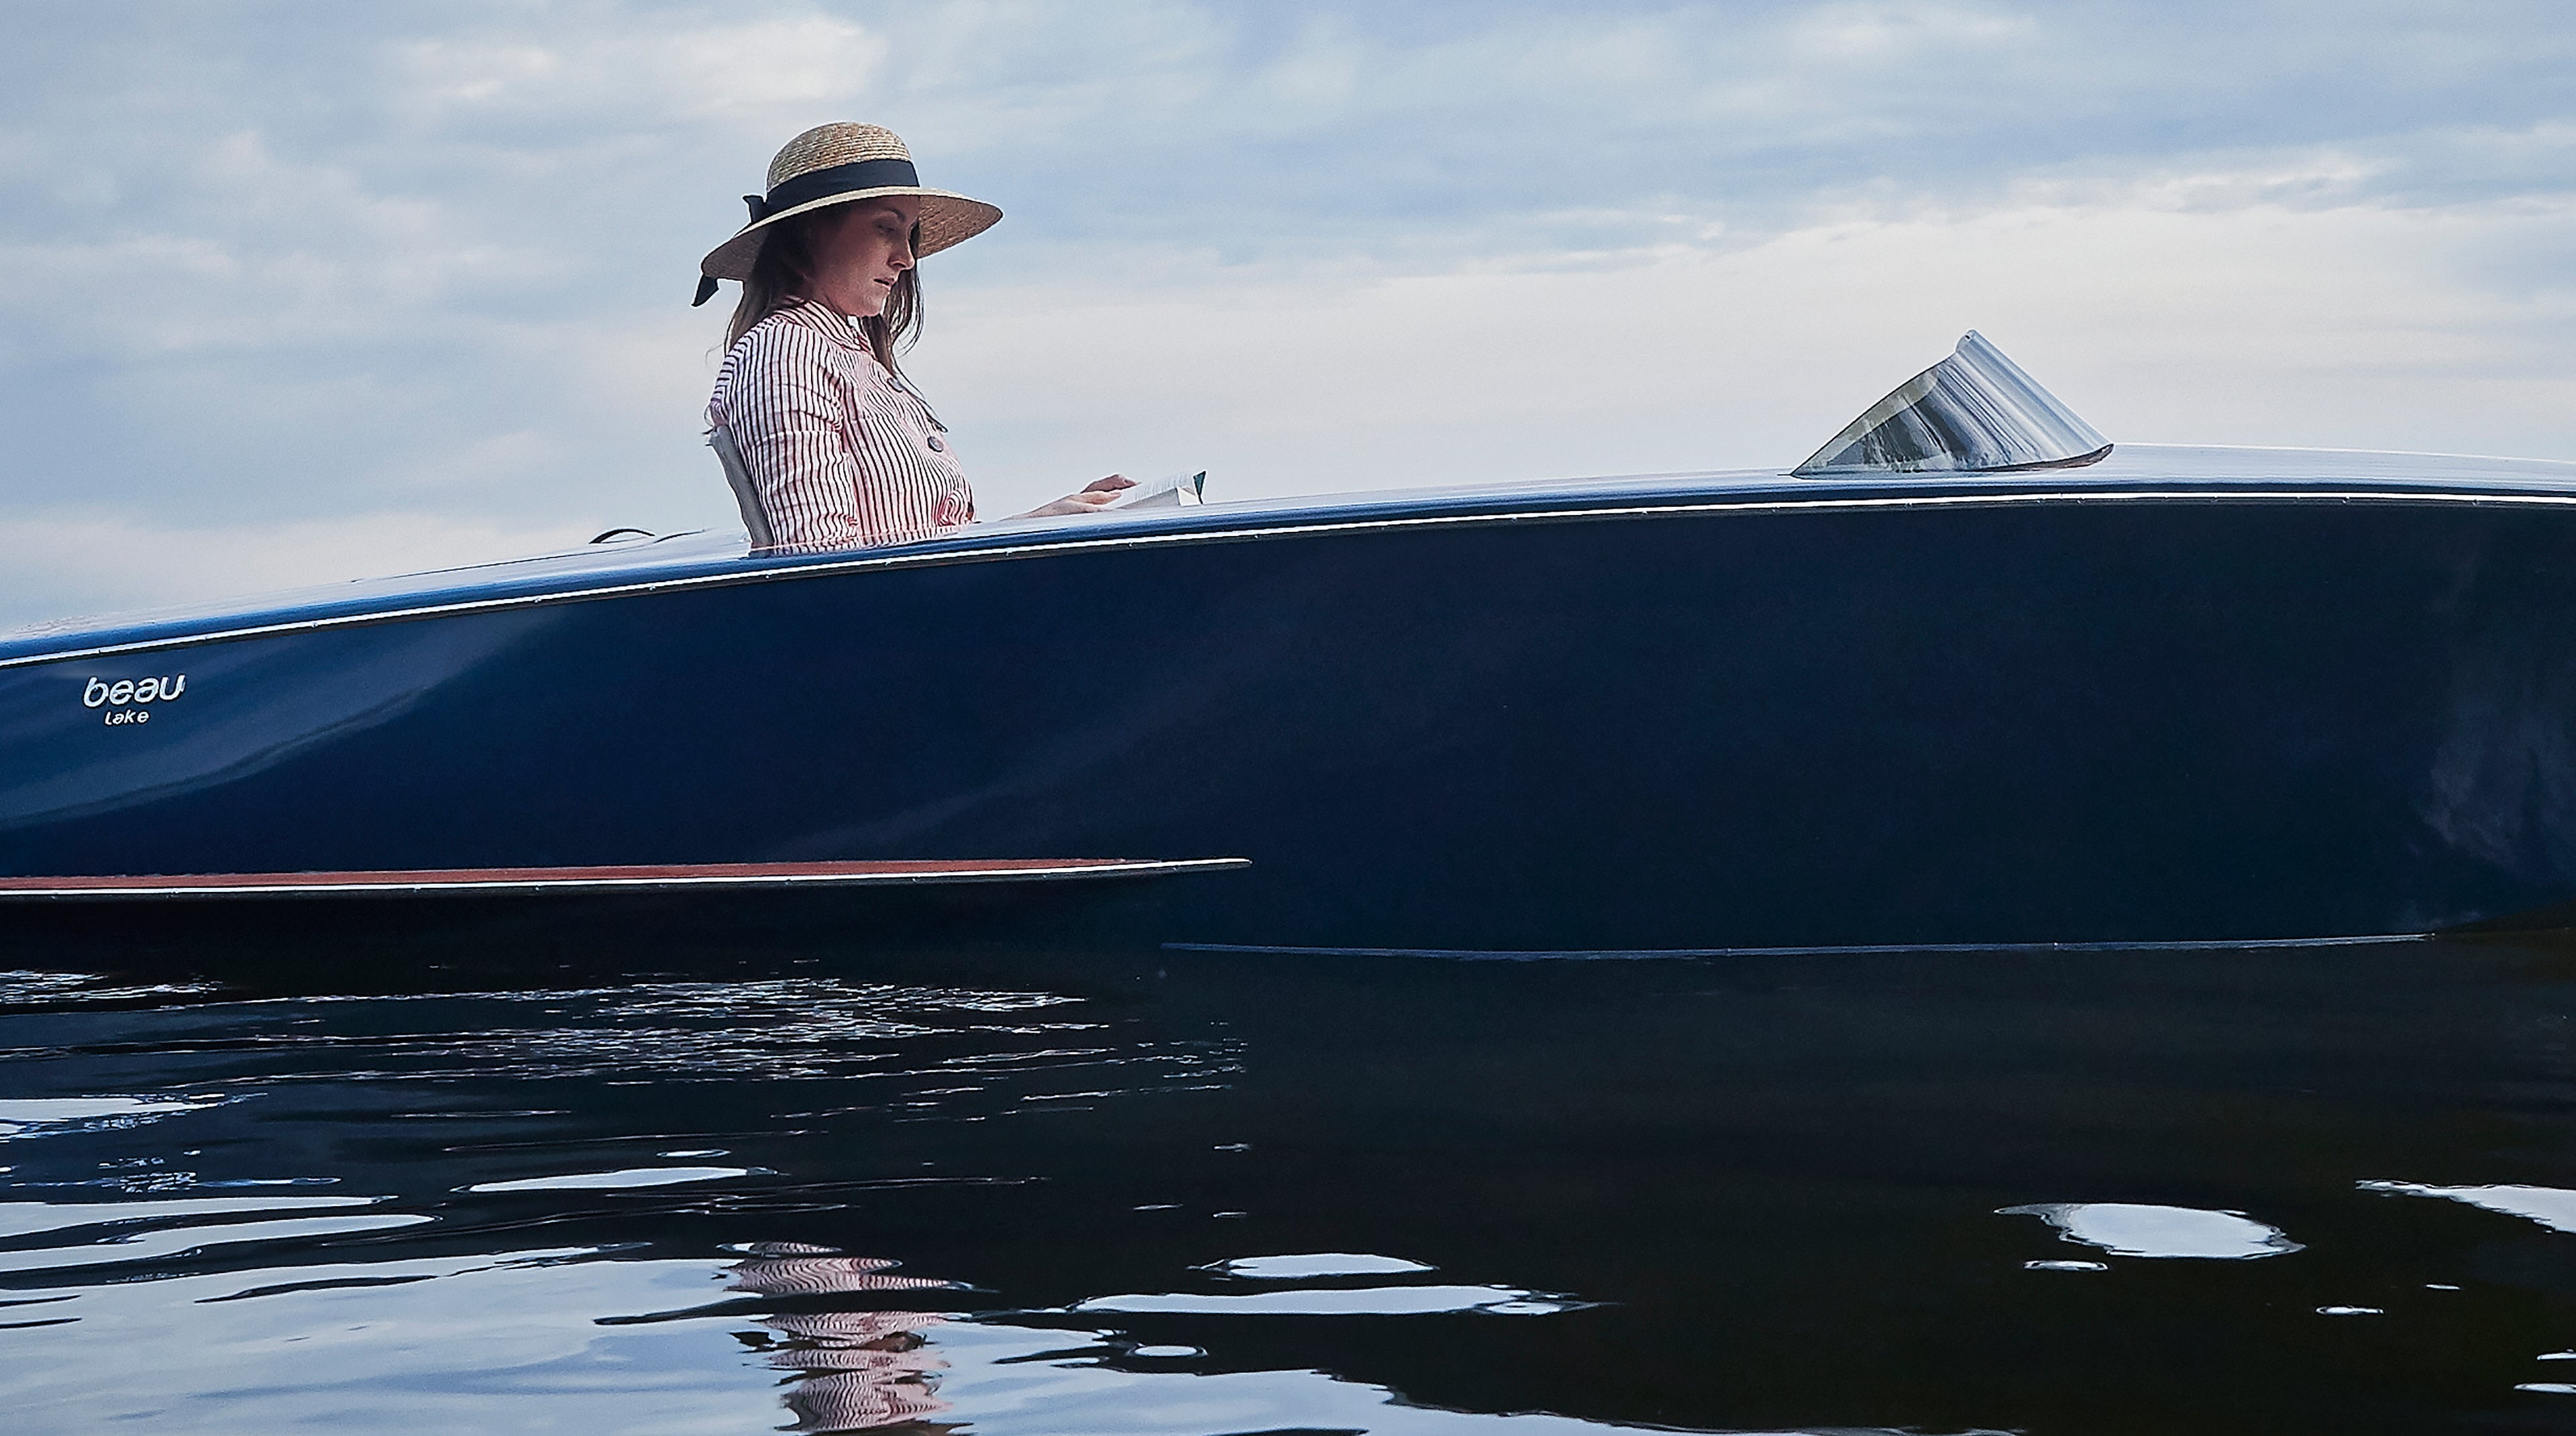 New Atlas - "Beau Lake taps swinging 60s style for paddle boating makeover"